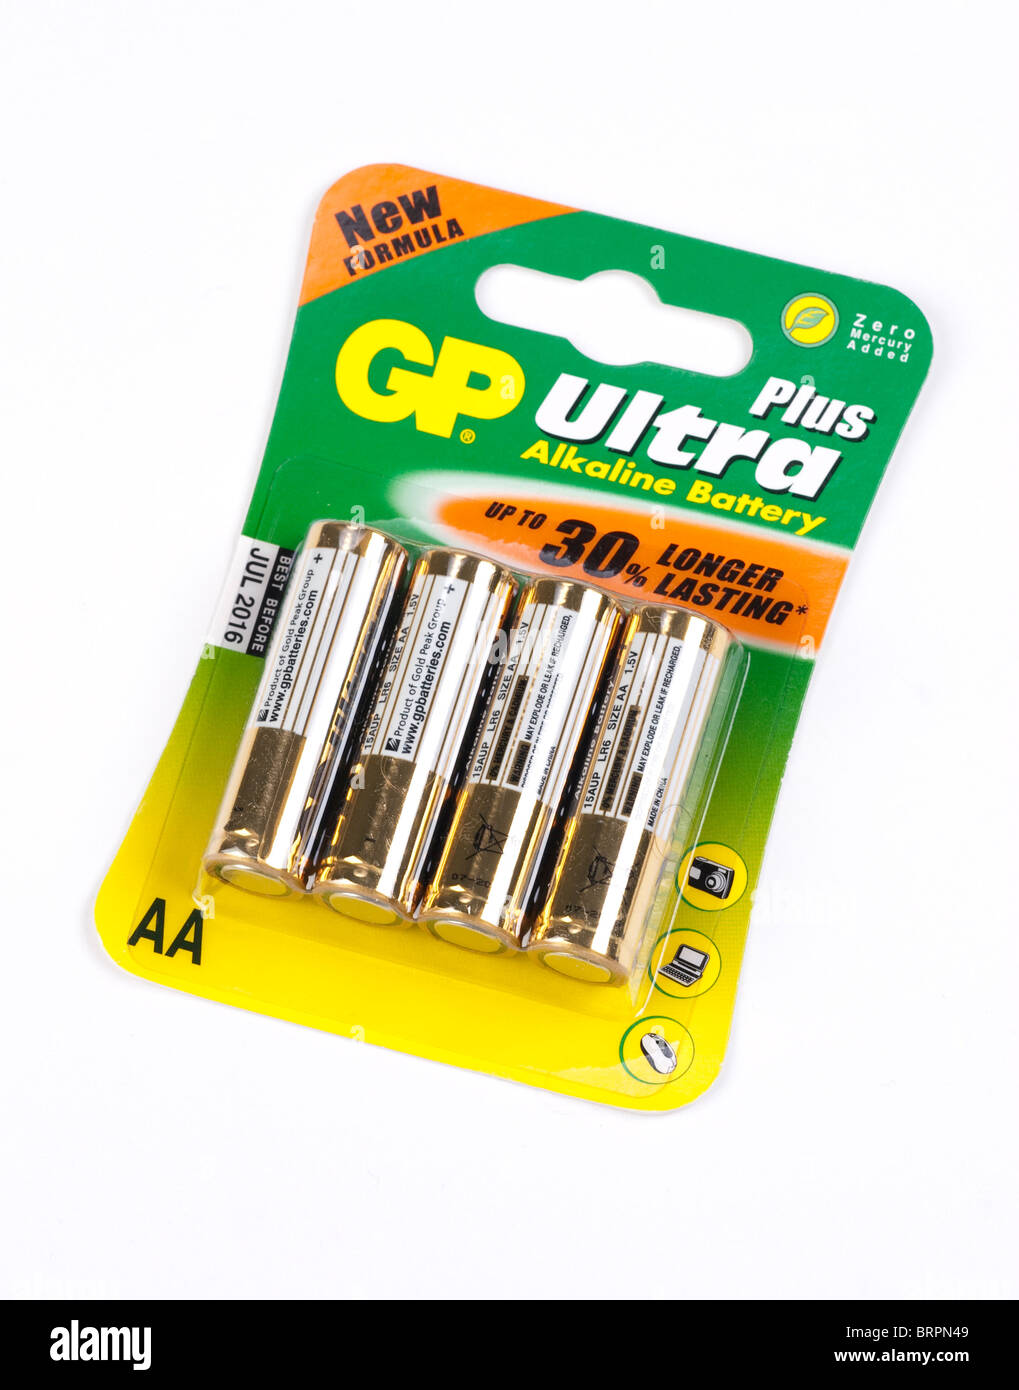 Rechargeable Alkaline Batteries LR6 LR03 AA AAA 1.5V with 2/4 Slots  Intelligent USB Battery